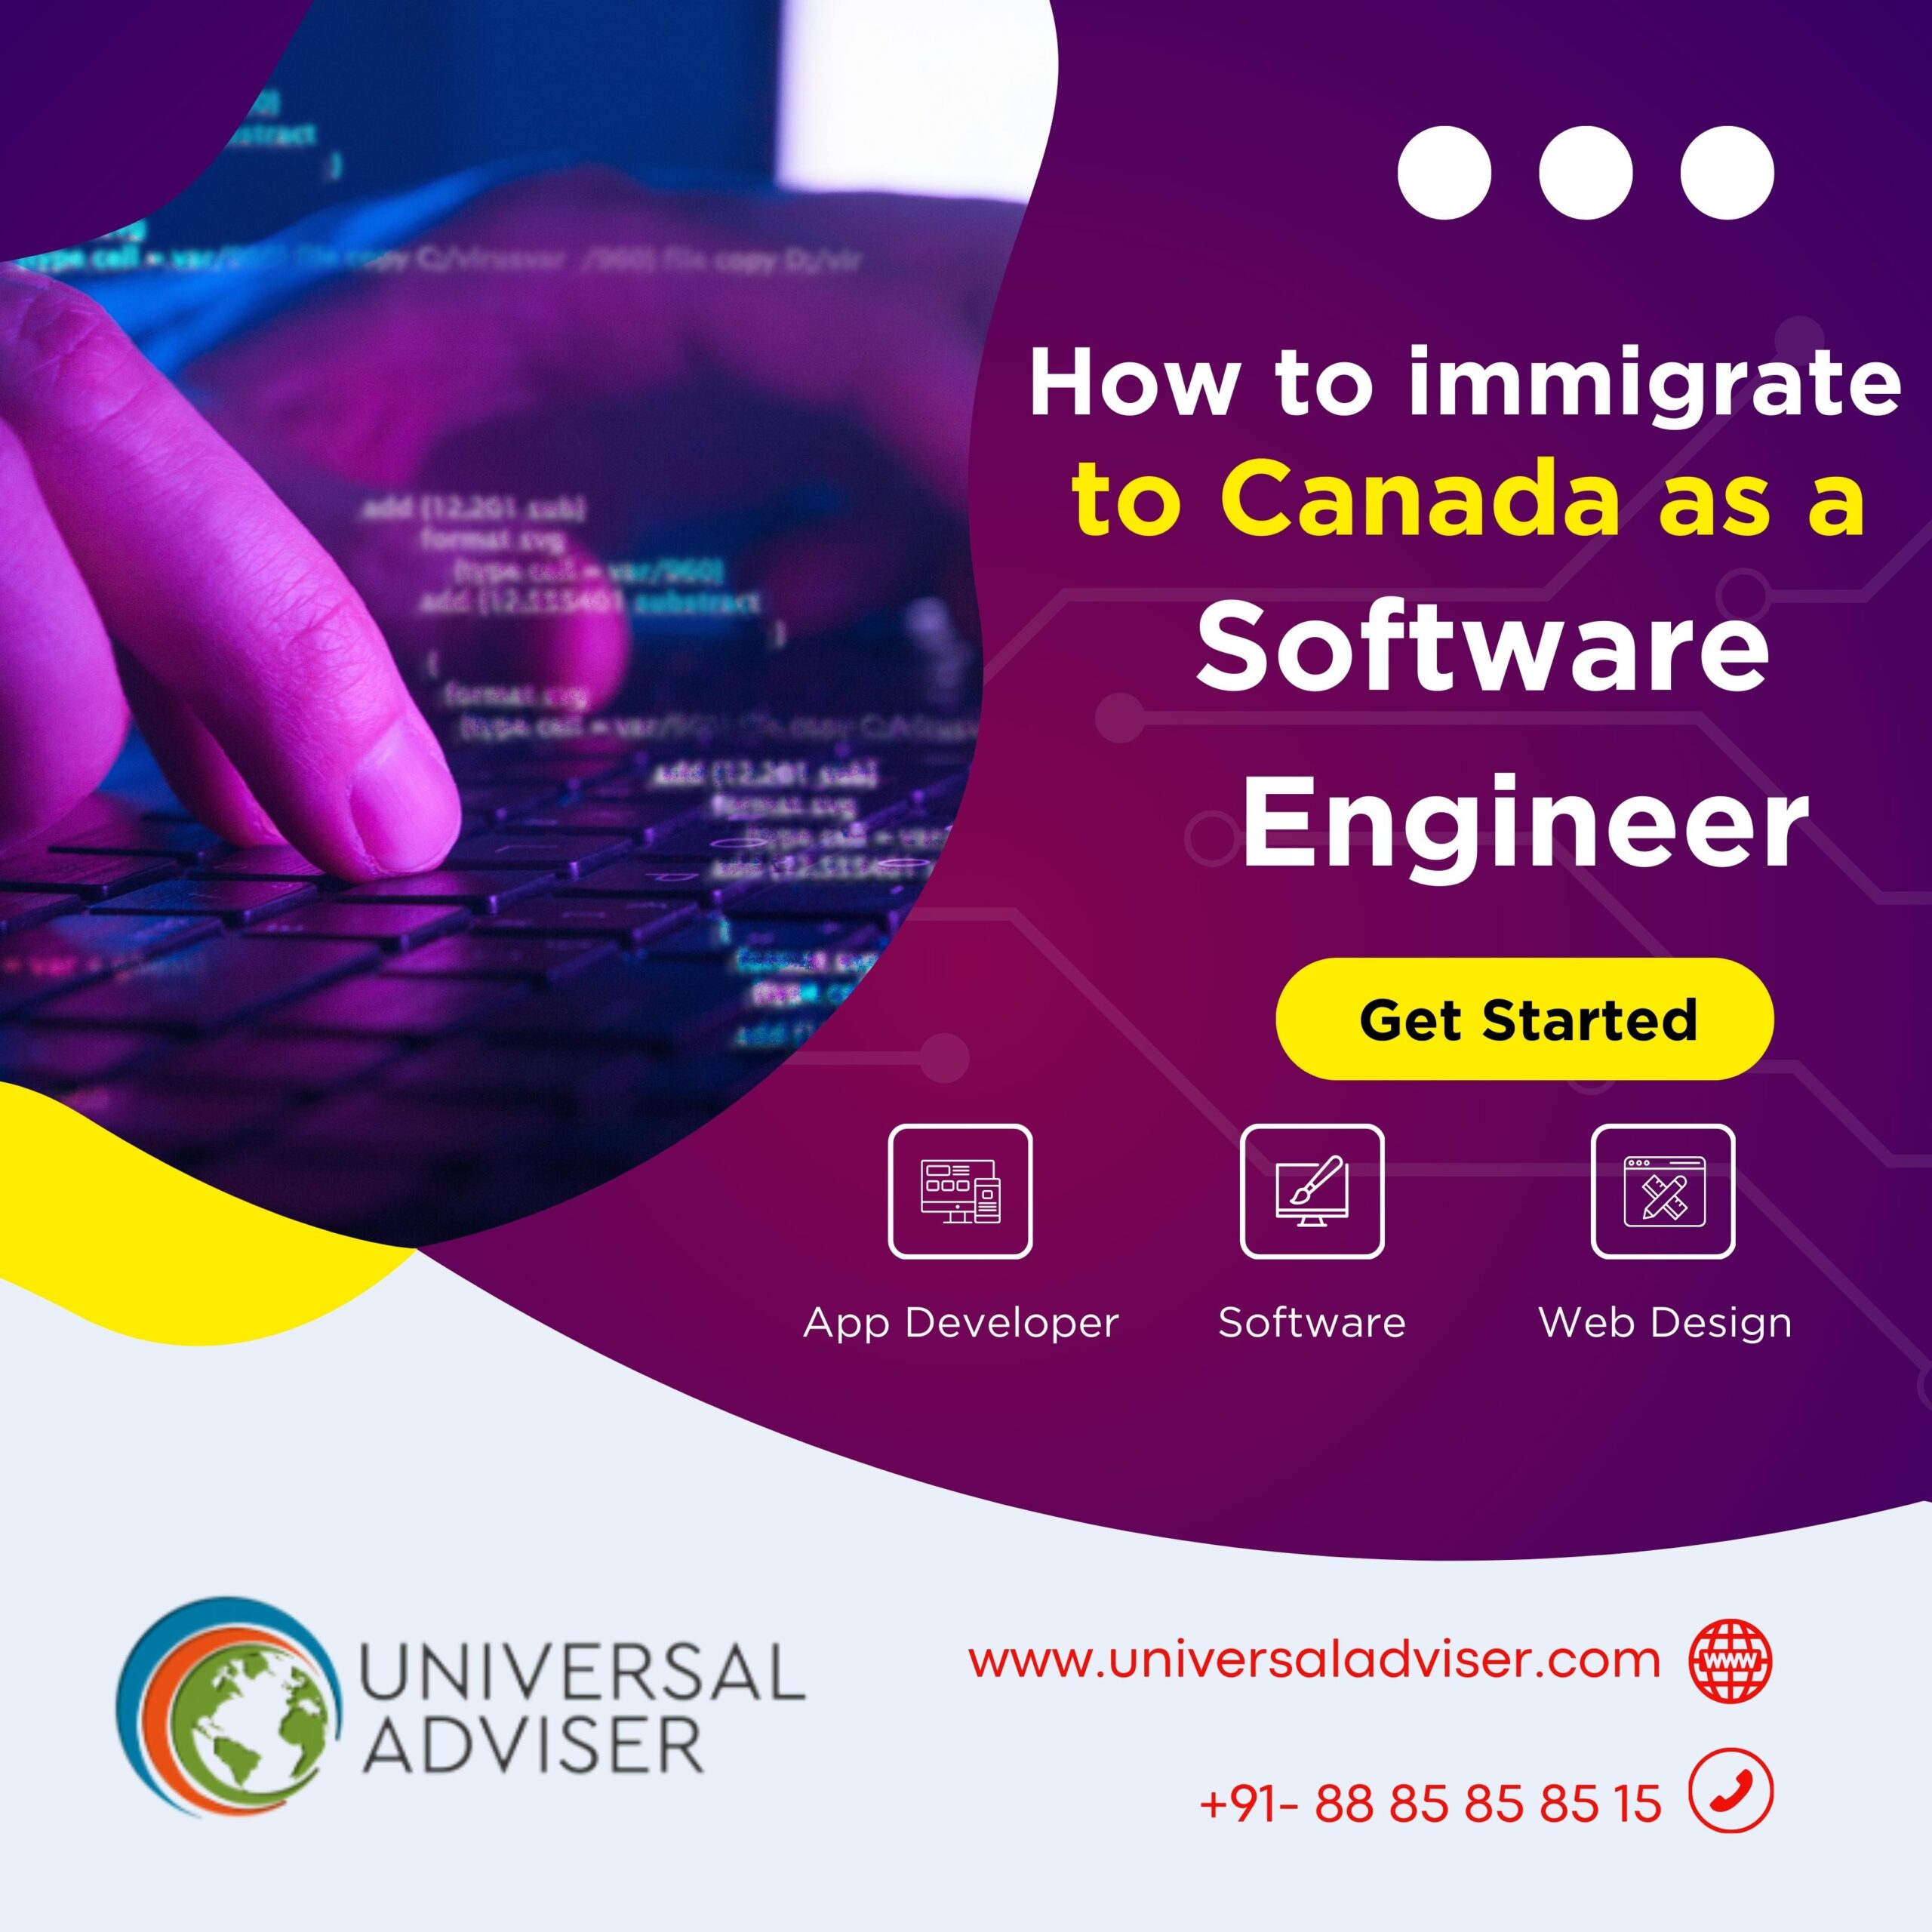 How to immigrate to Canada as a Software Engineer